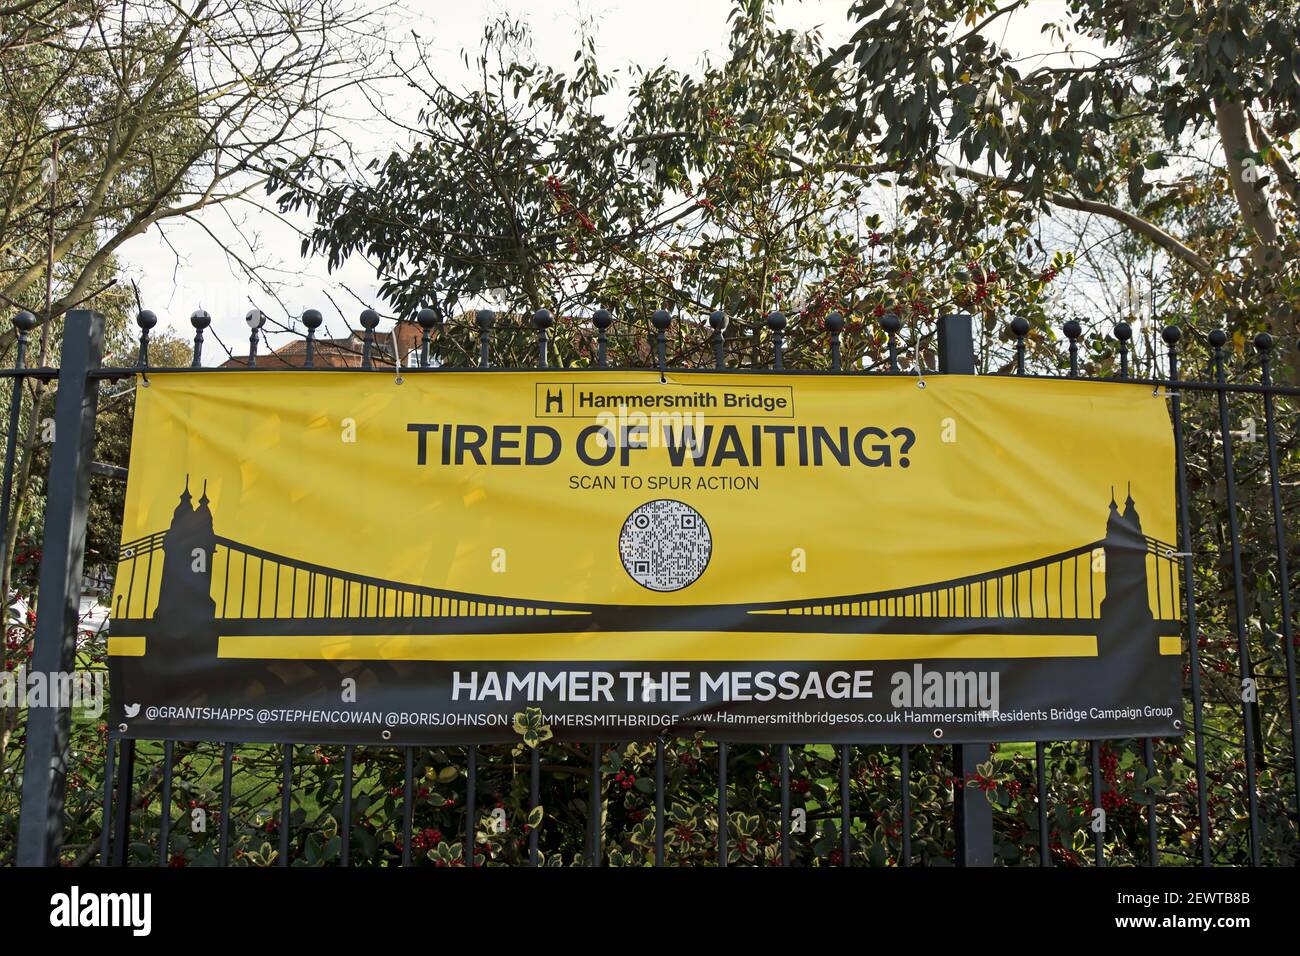 banner placed by hammersmith residents campaign group encouraging action to repair and re-open hammersmith bridge, in mortlake, london, england Stock Photo